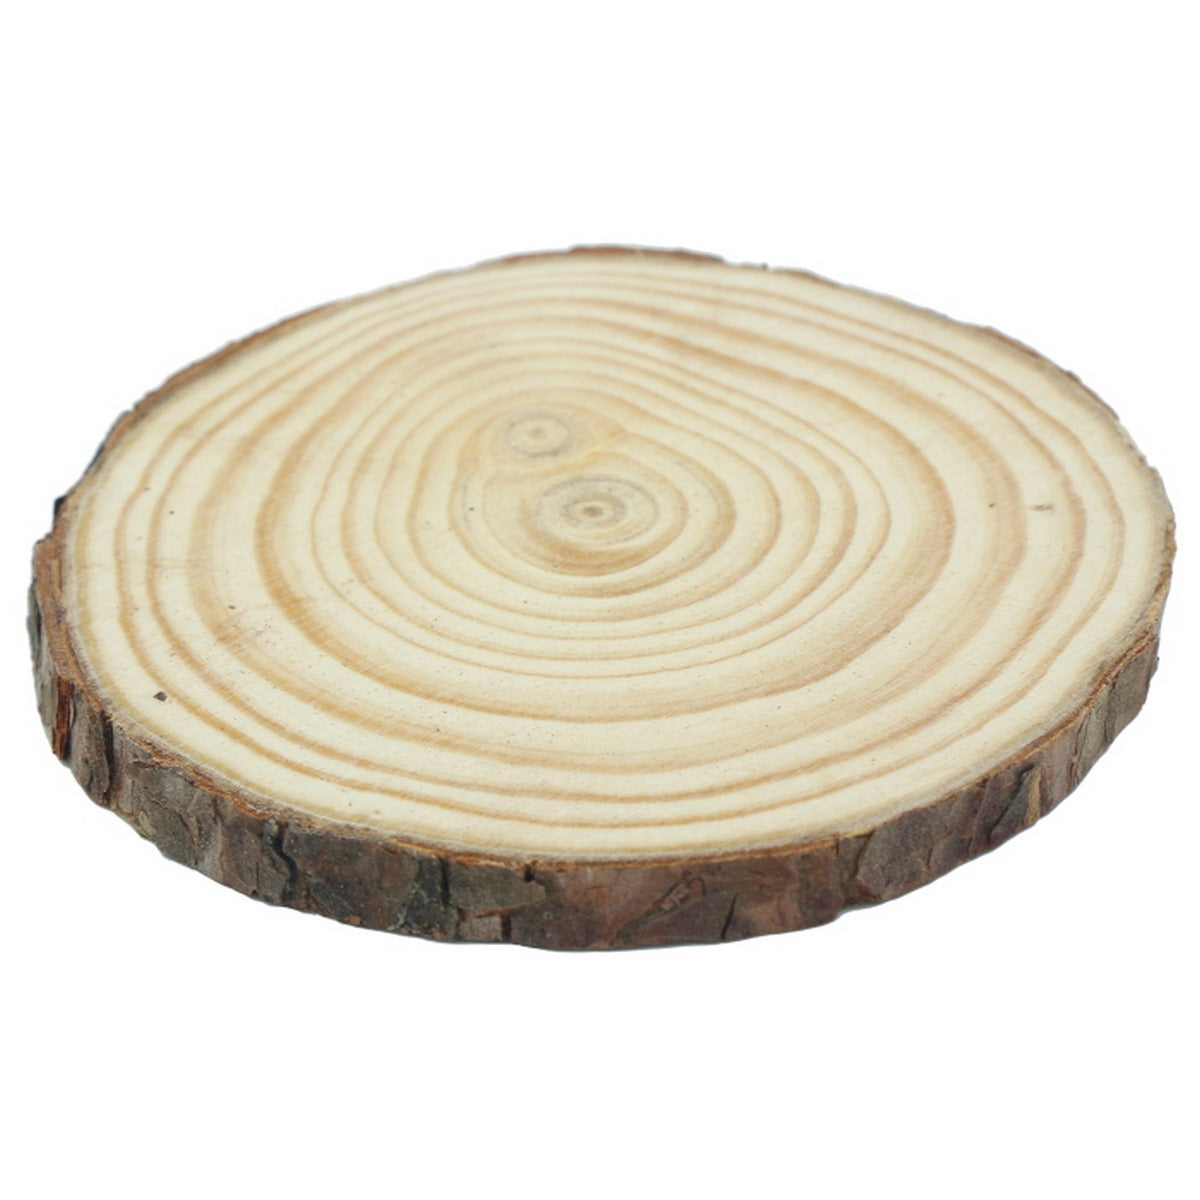 jags-mumbai Wooden Slice 18-22 cm Wooden Slice Large size | Wooden disk for painting | Wooden plate for DIY